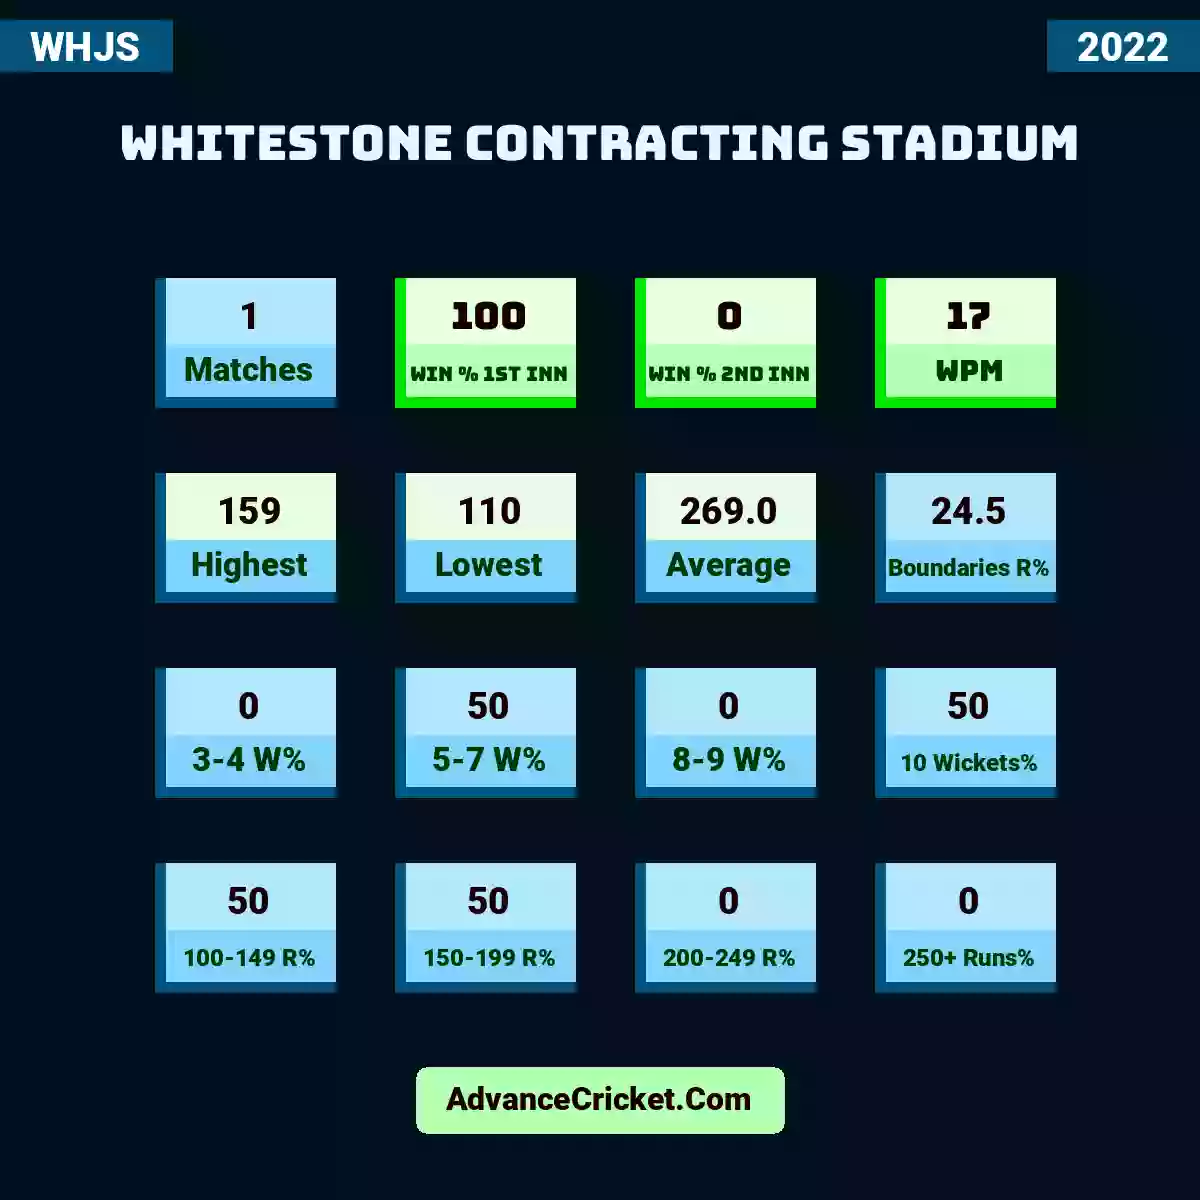 Image showing Whitestone Contracting Stadium with Matches: 1, Win % 1st Inn: 100, Win % 2nd Inn: 0, WPM: 17, Highest: 159, Lowest: 110, Average: 269.0, Boundaries R%: 24.5, 3-4 W%: 0, 5-7 W%: 50, 8-9 W%: 0, 10 Wickets%: 50, 100-149 R%: 50, 150-199 R%: 50, 200-249 R%: 0, 250+ Runs%: 0.